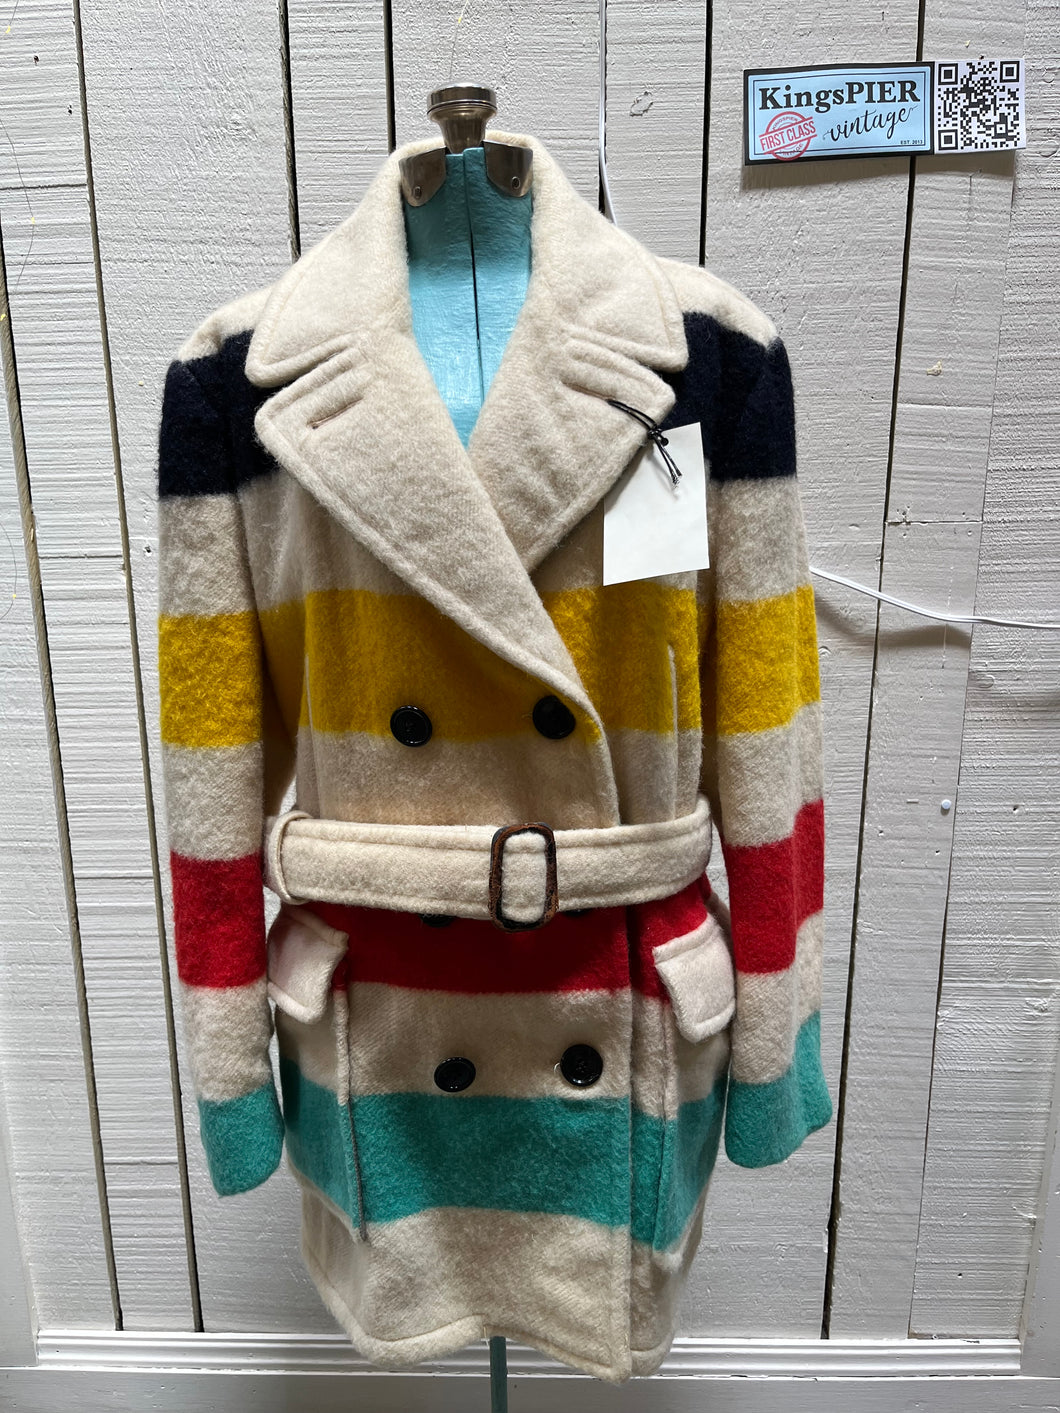 Genuine 1960’s Hudson’s Bay Company 100% wool point blanket coat in the iconic multi-stripe colours. The coat features flap pockets and hand warmer pockets, double breasted button closures and belt. 

Made in Canada. 
Chest 40”